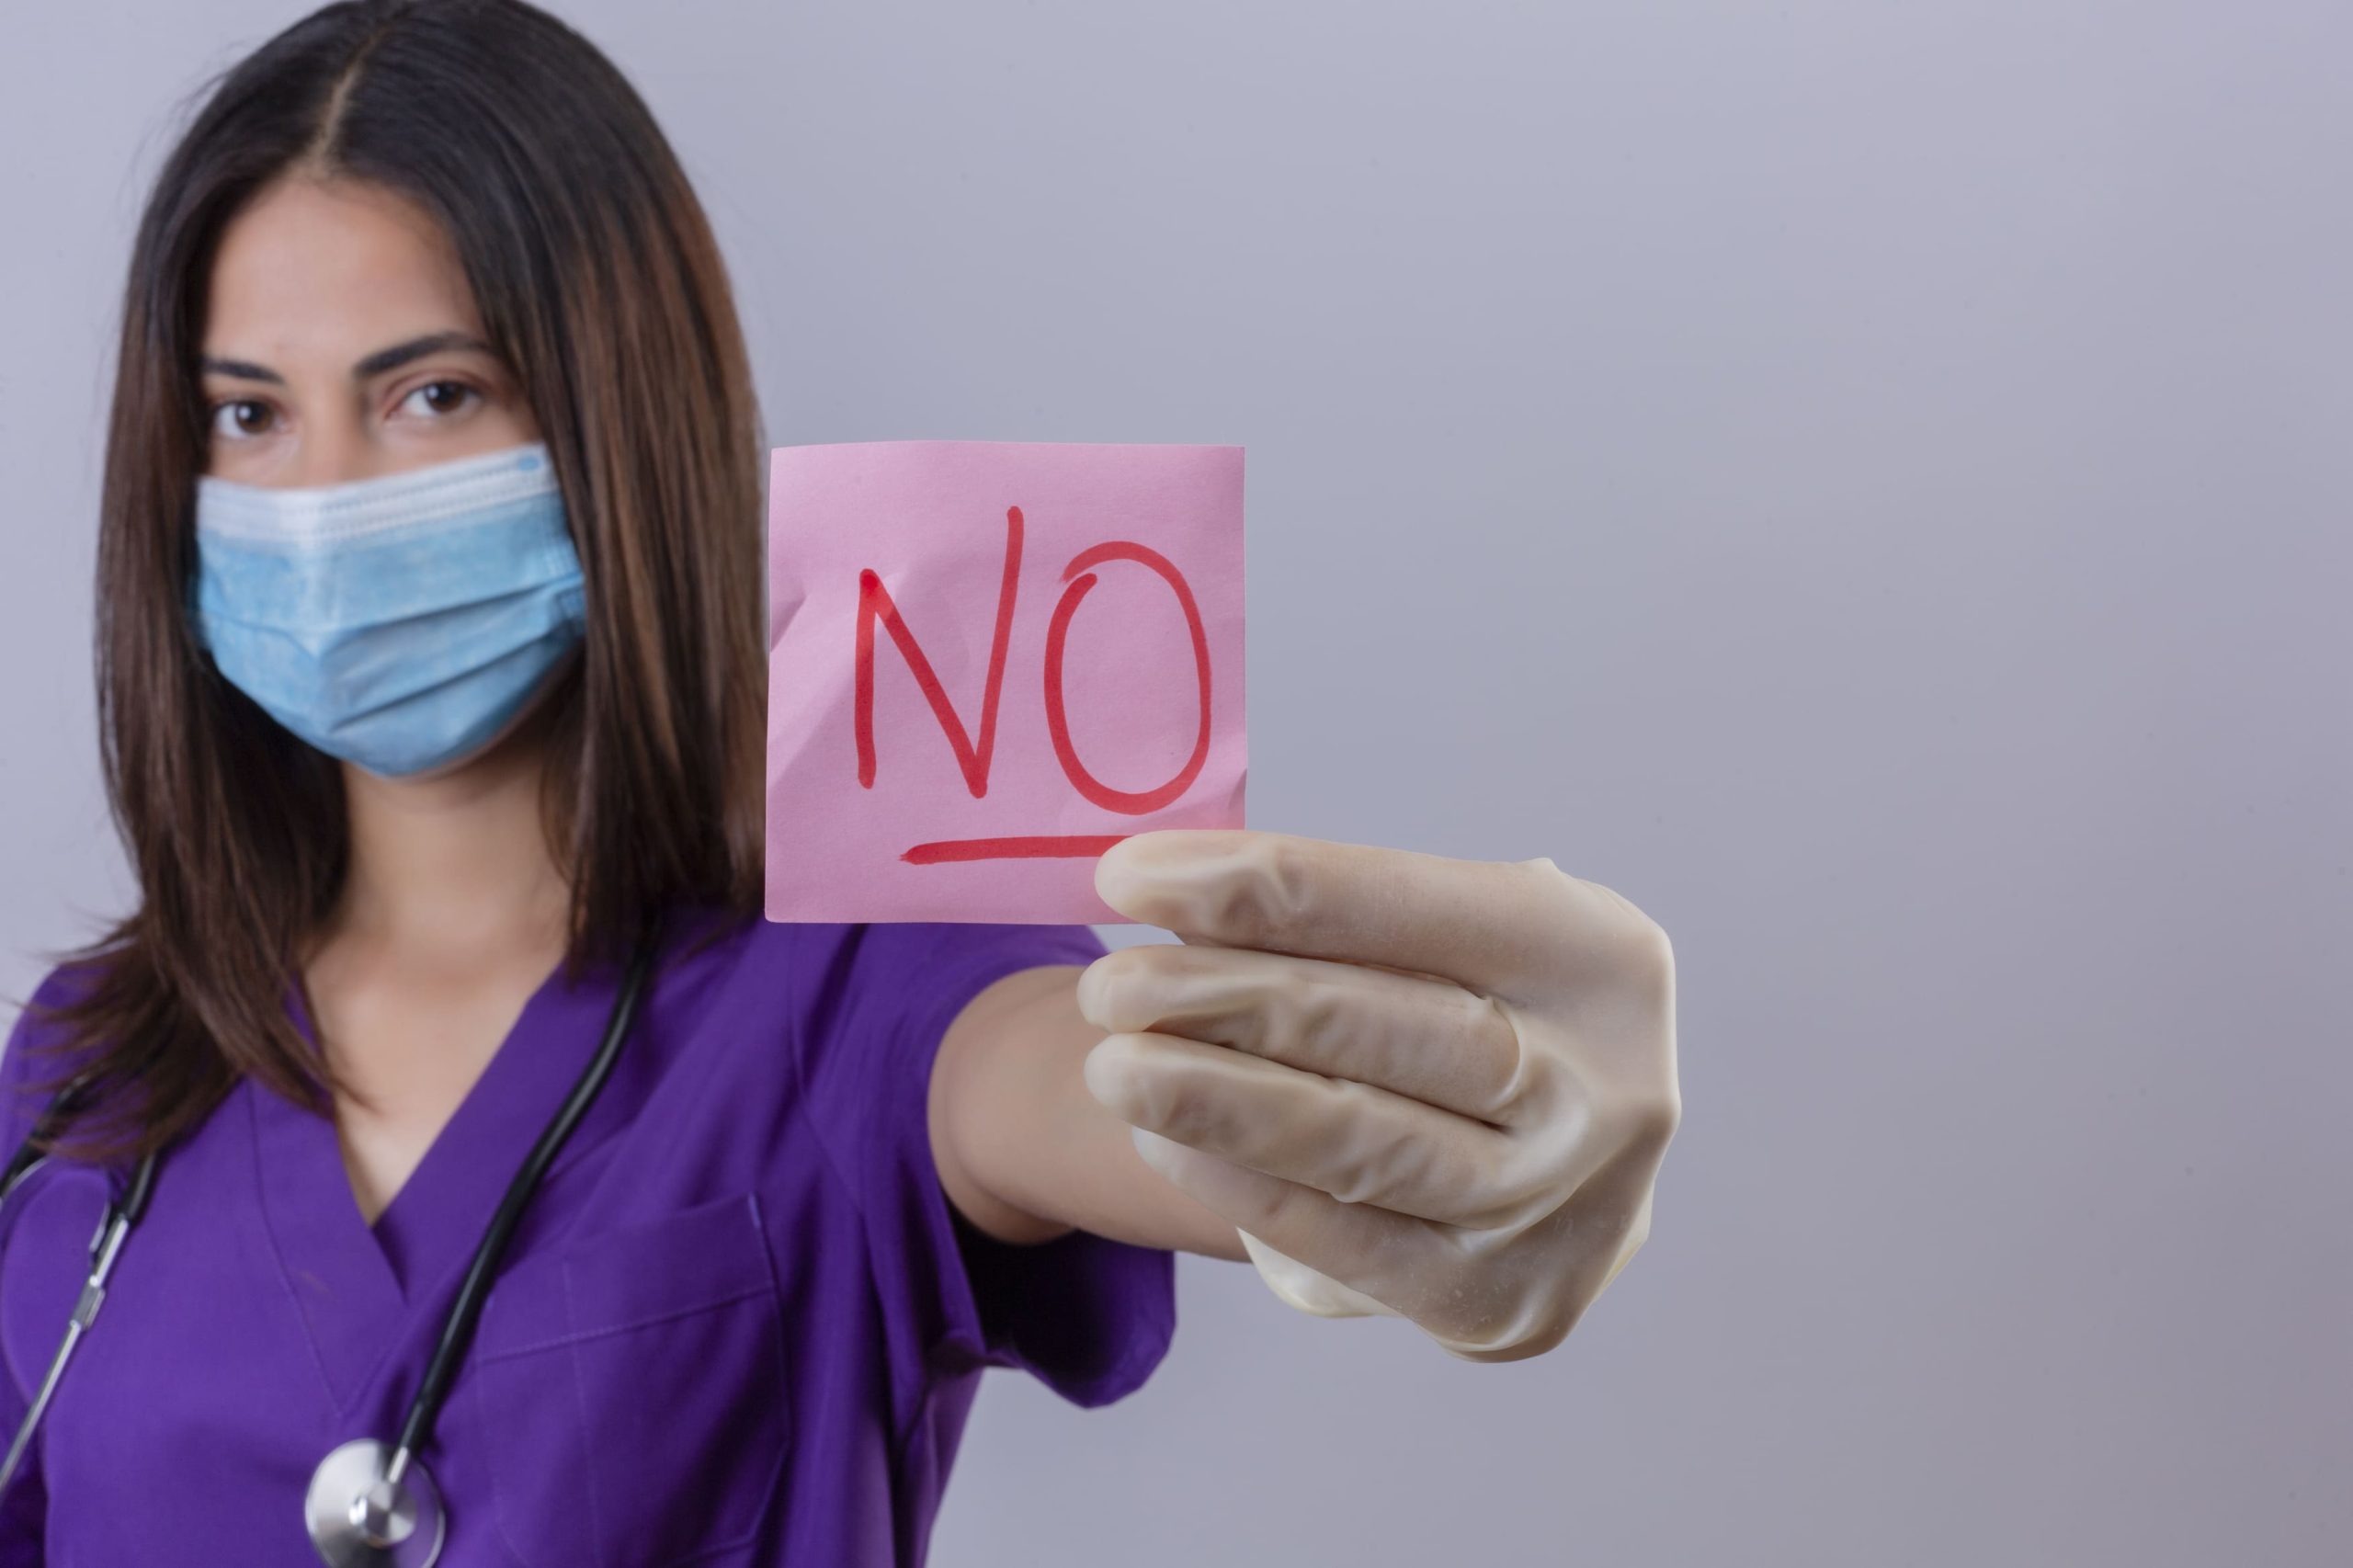 young-woman-nurse-wearing-medical-uniform-protective-mask-gloves-with-stethoscope-showing-reminder-paper-with-word-no-looking-confident-1-1-scaled.jpg